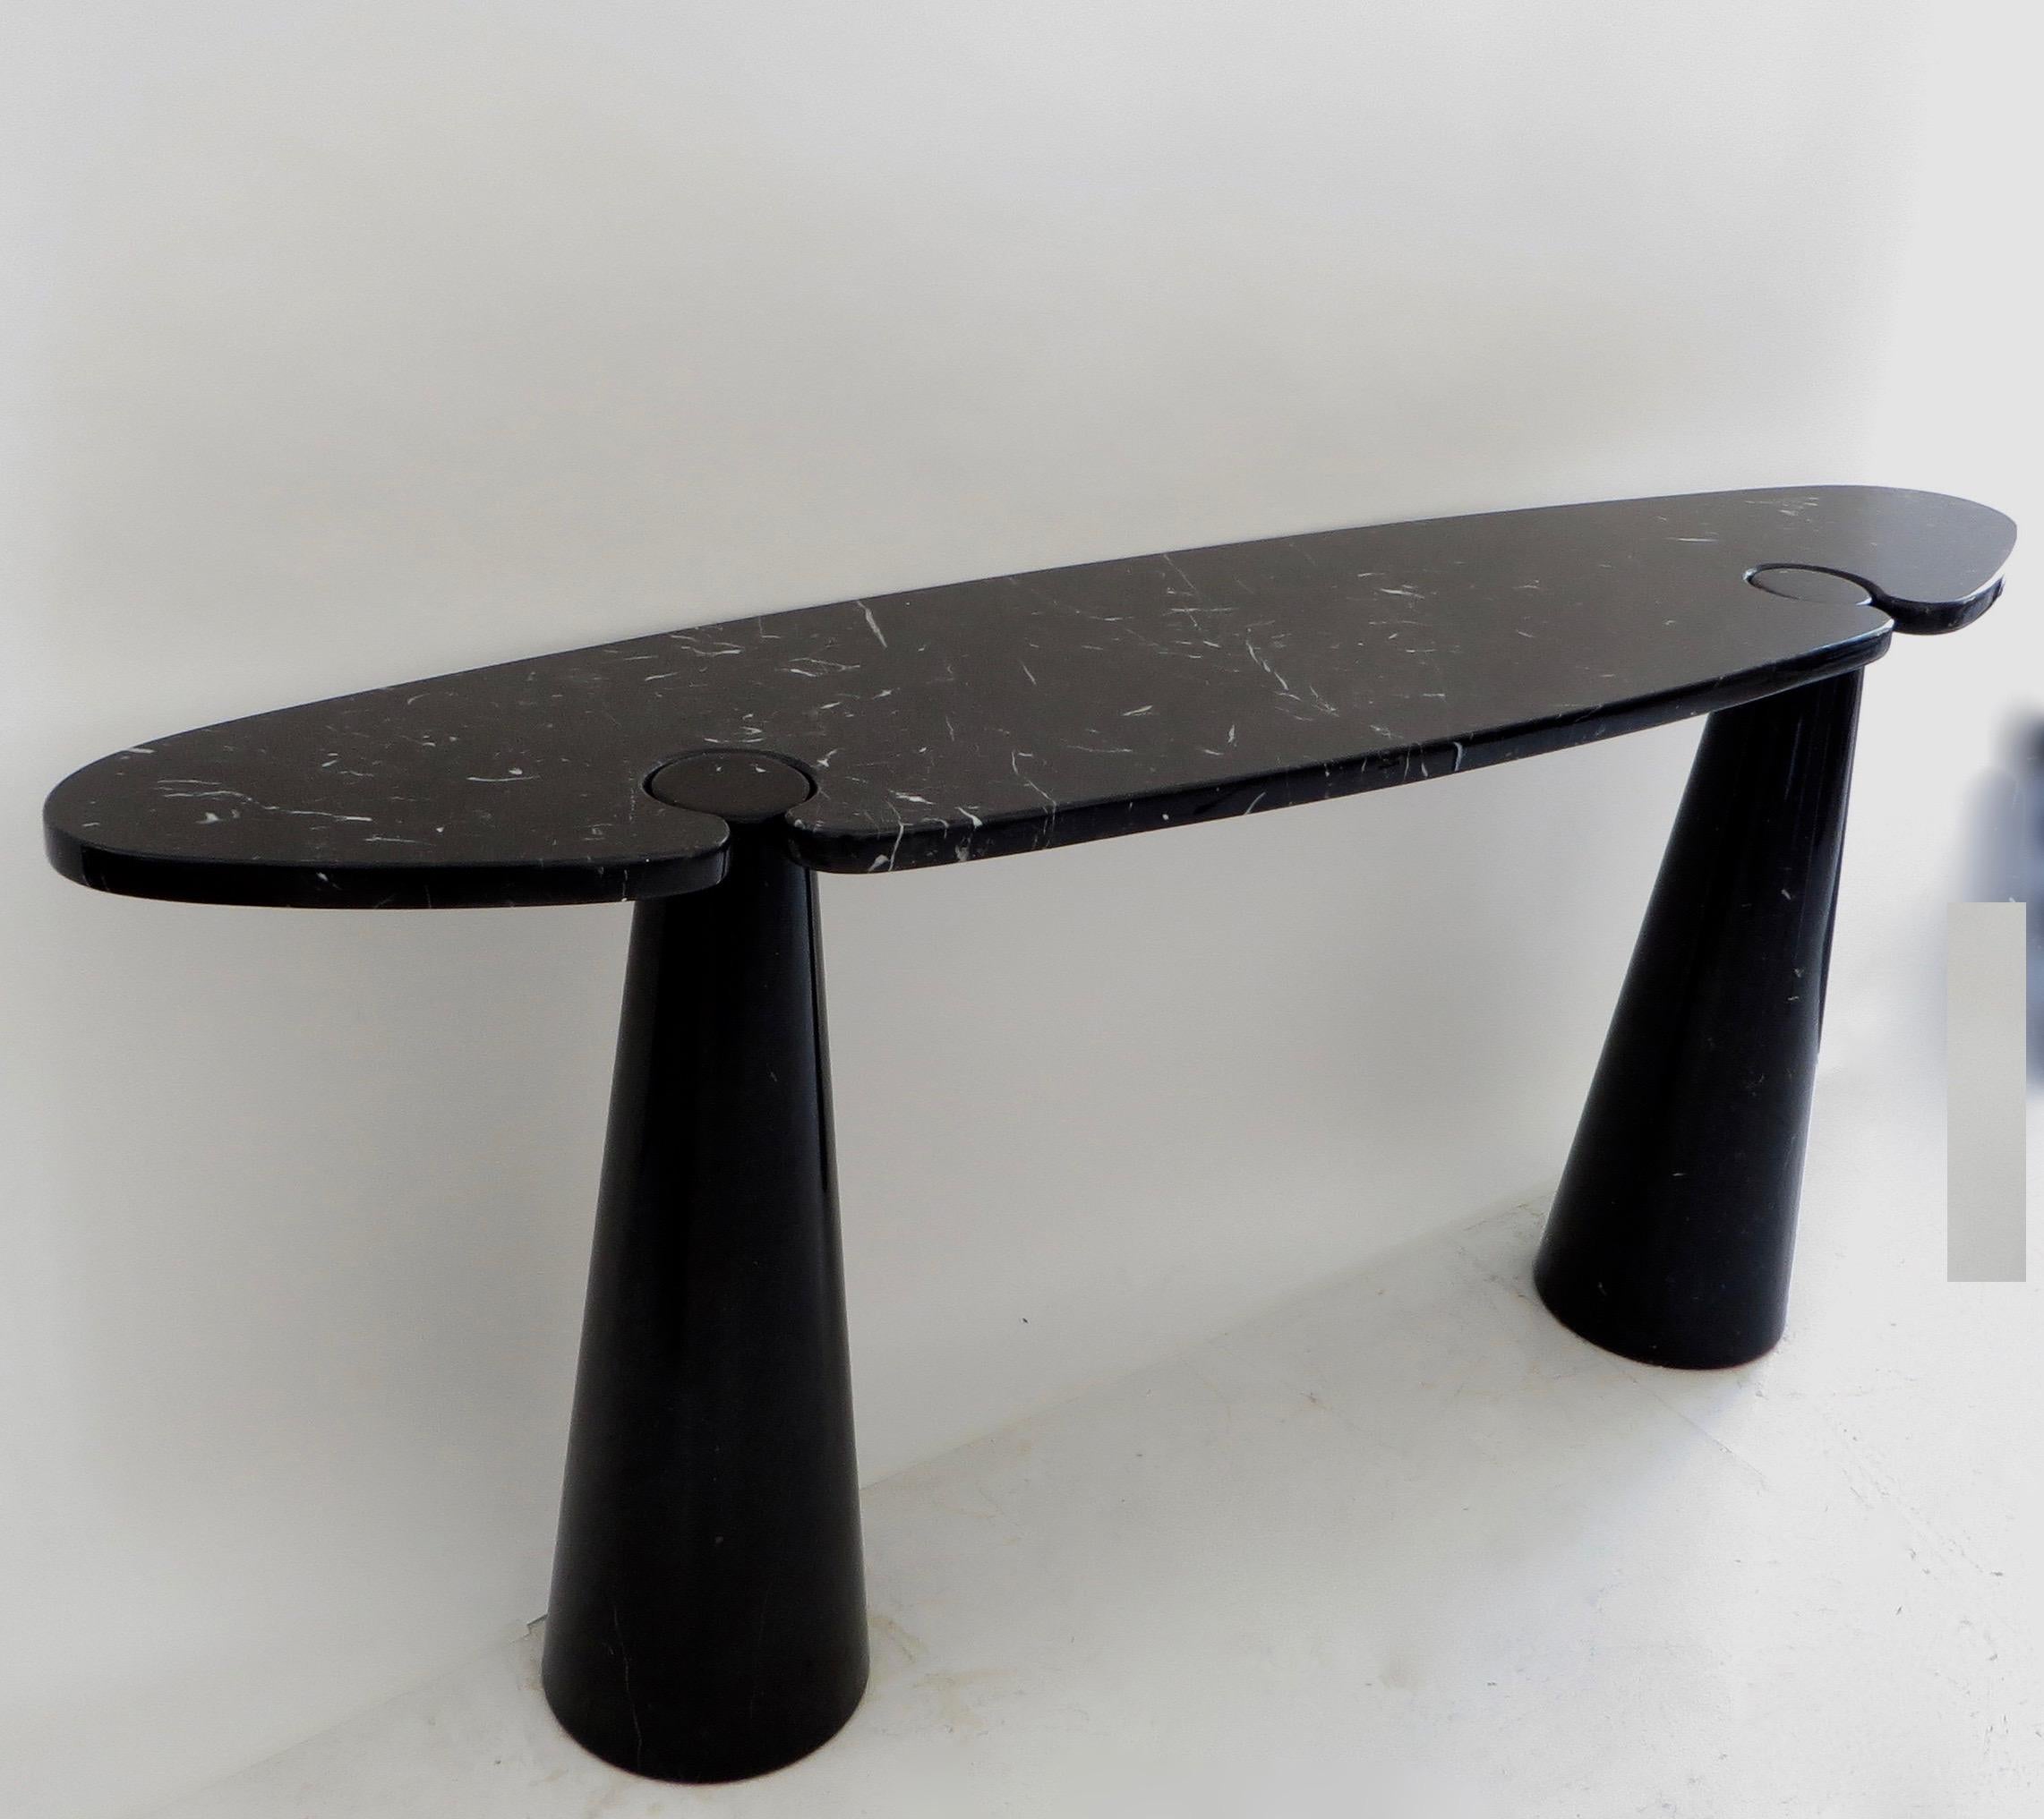 Angelo Mangiarotti vintage iconic Italian console Eros collection for Skipper, circa 1971.
The black or nero Marquina marble is nicely veined.
The top sits on the conical legs in the iconic Mangiarotti finely designed architectural manner. The